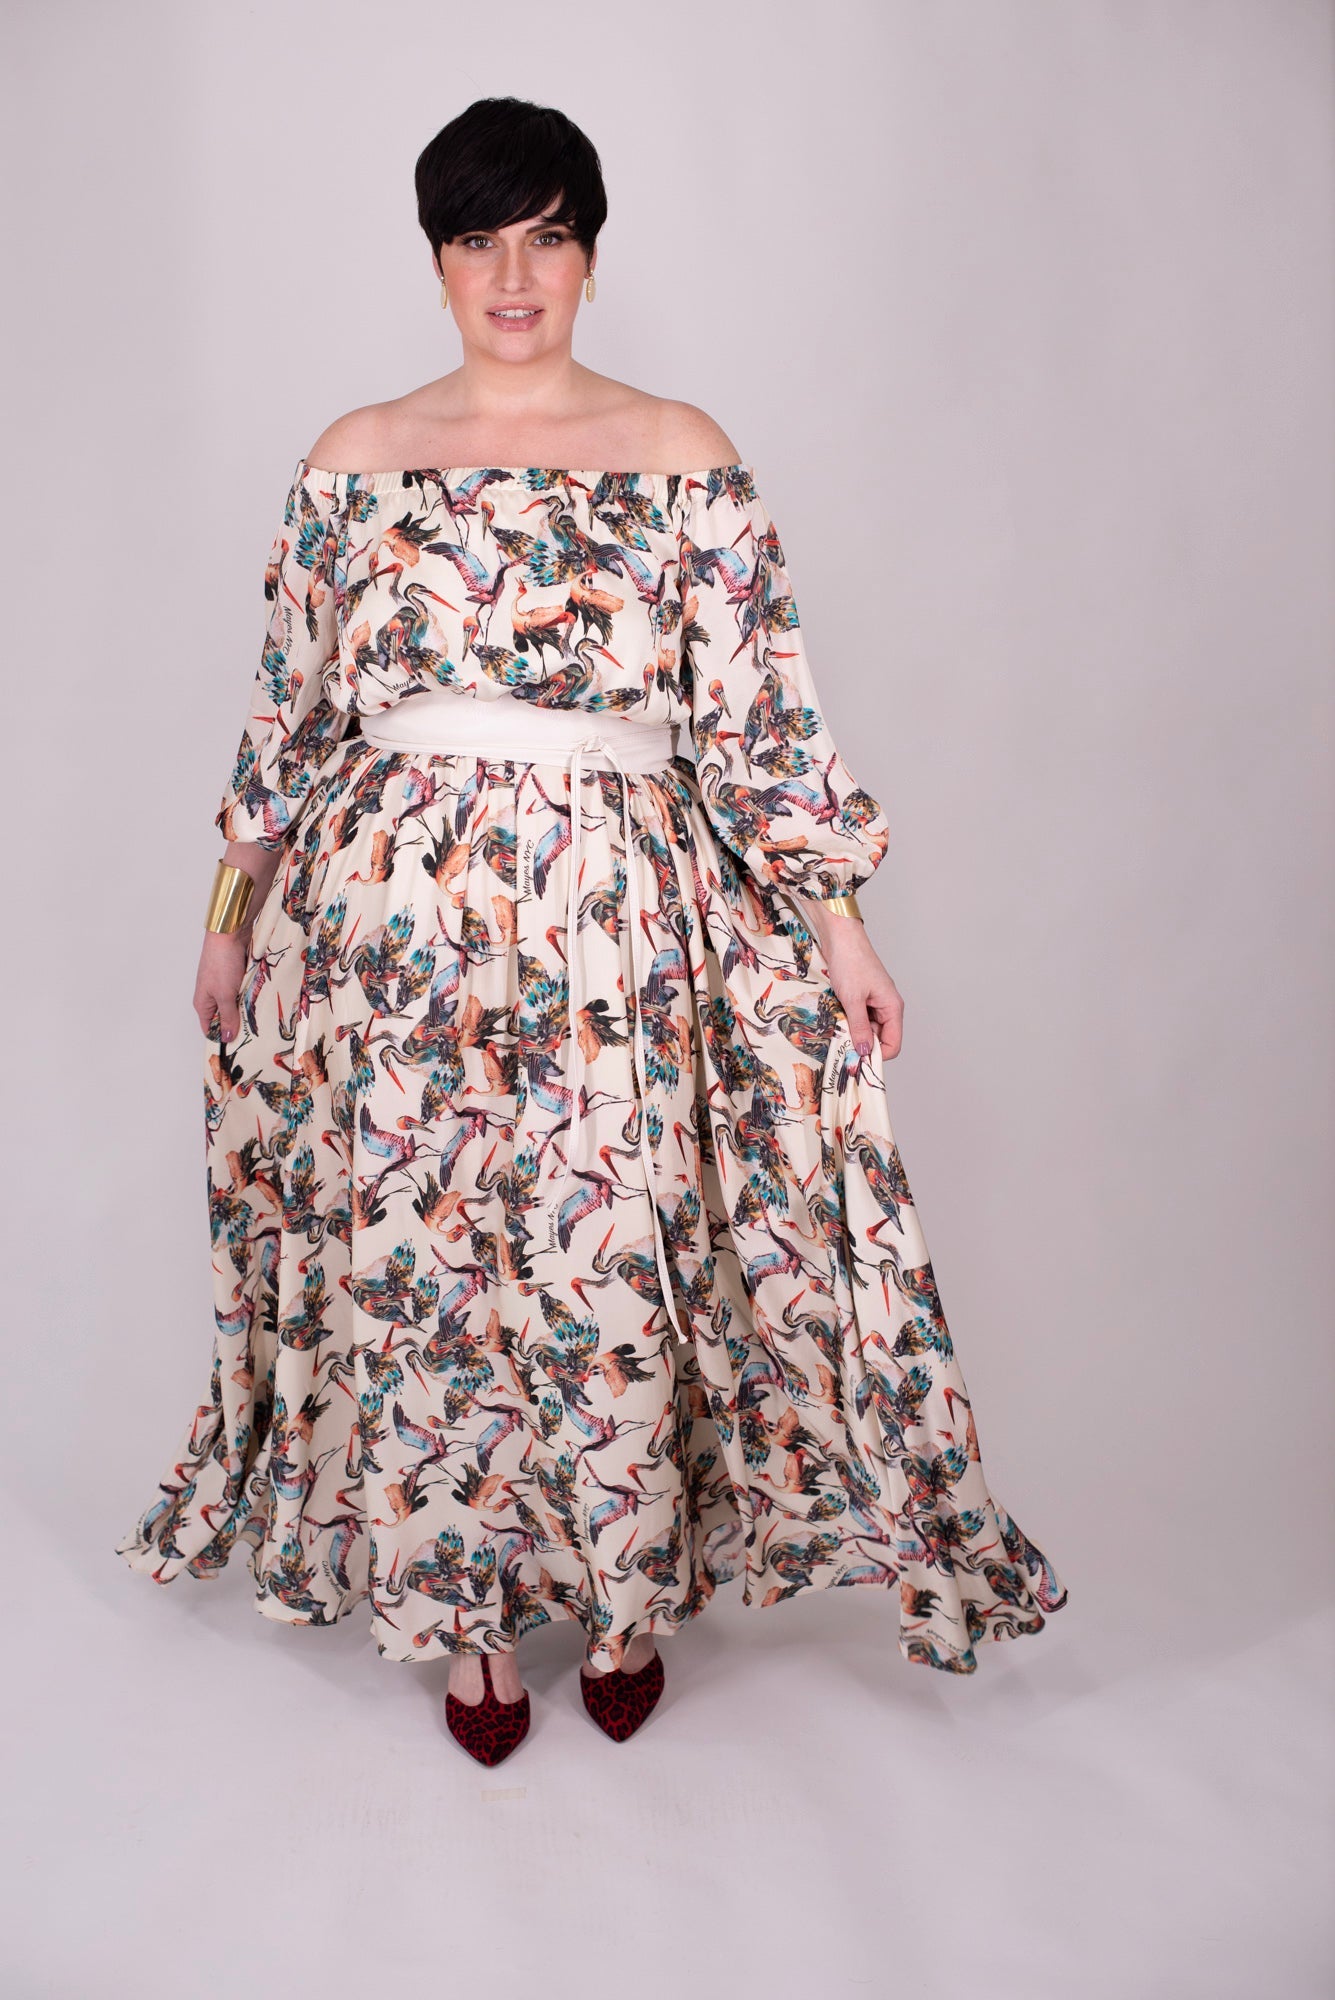 Mayes NYC Crane Maxi Dress in Cream-based color worn by model Max